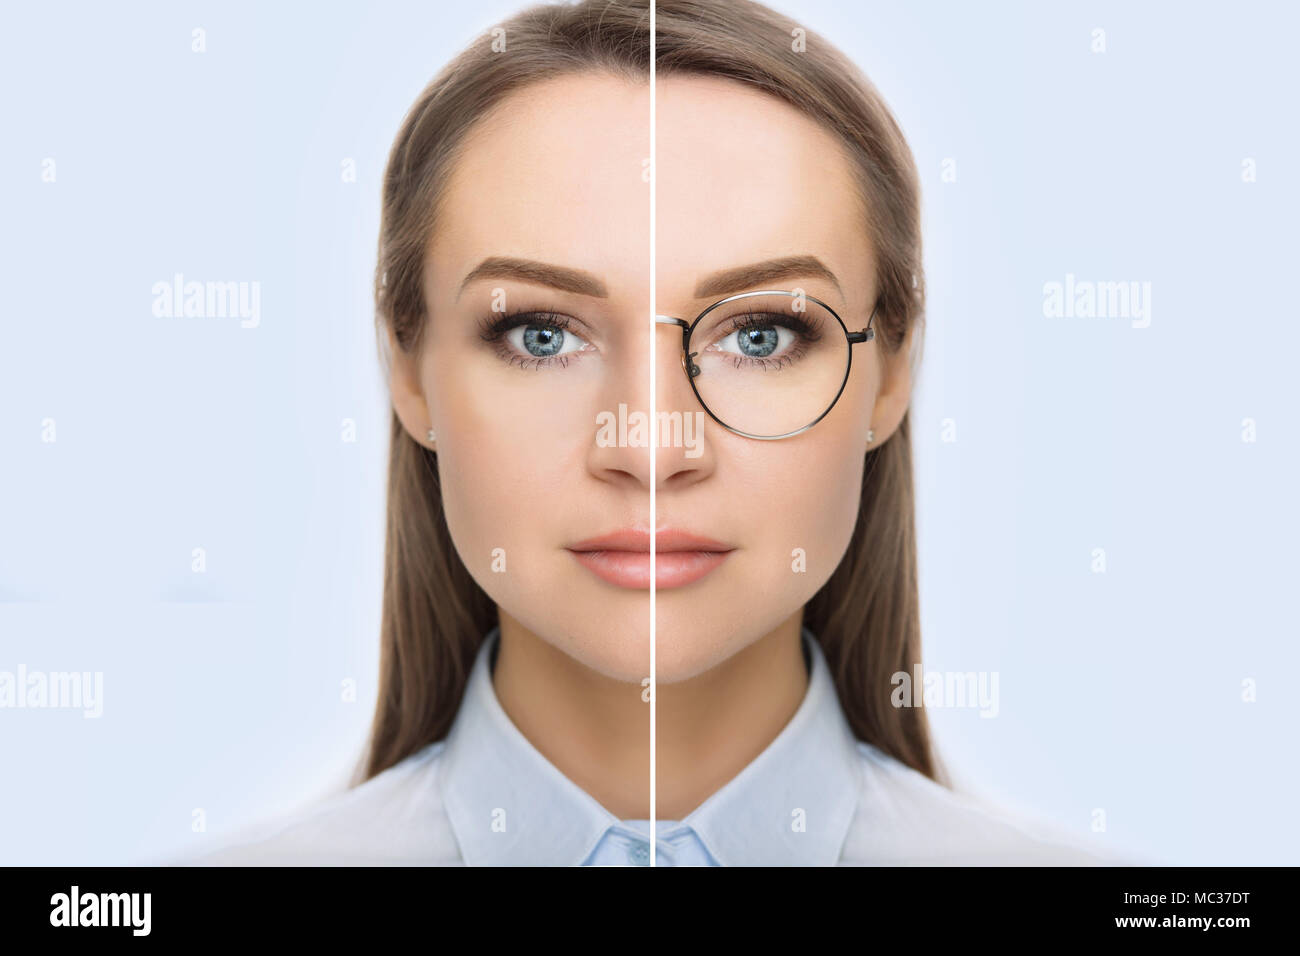 female face with glasses and without glasses Stock Photo